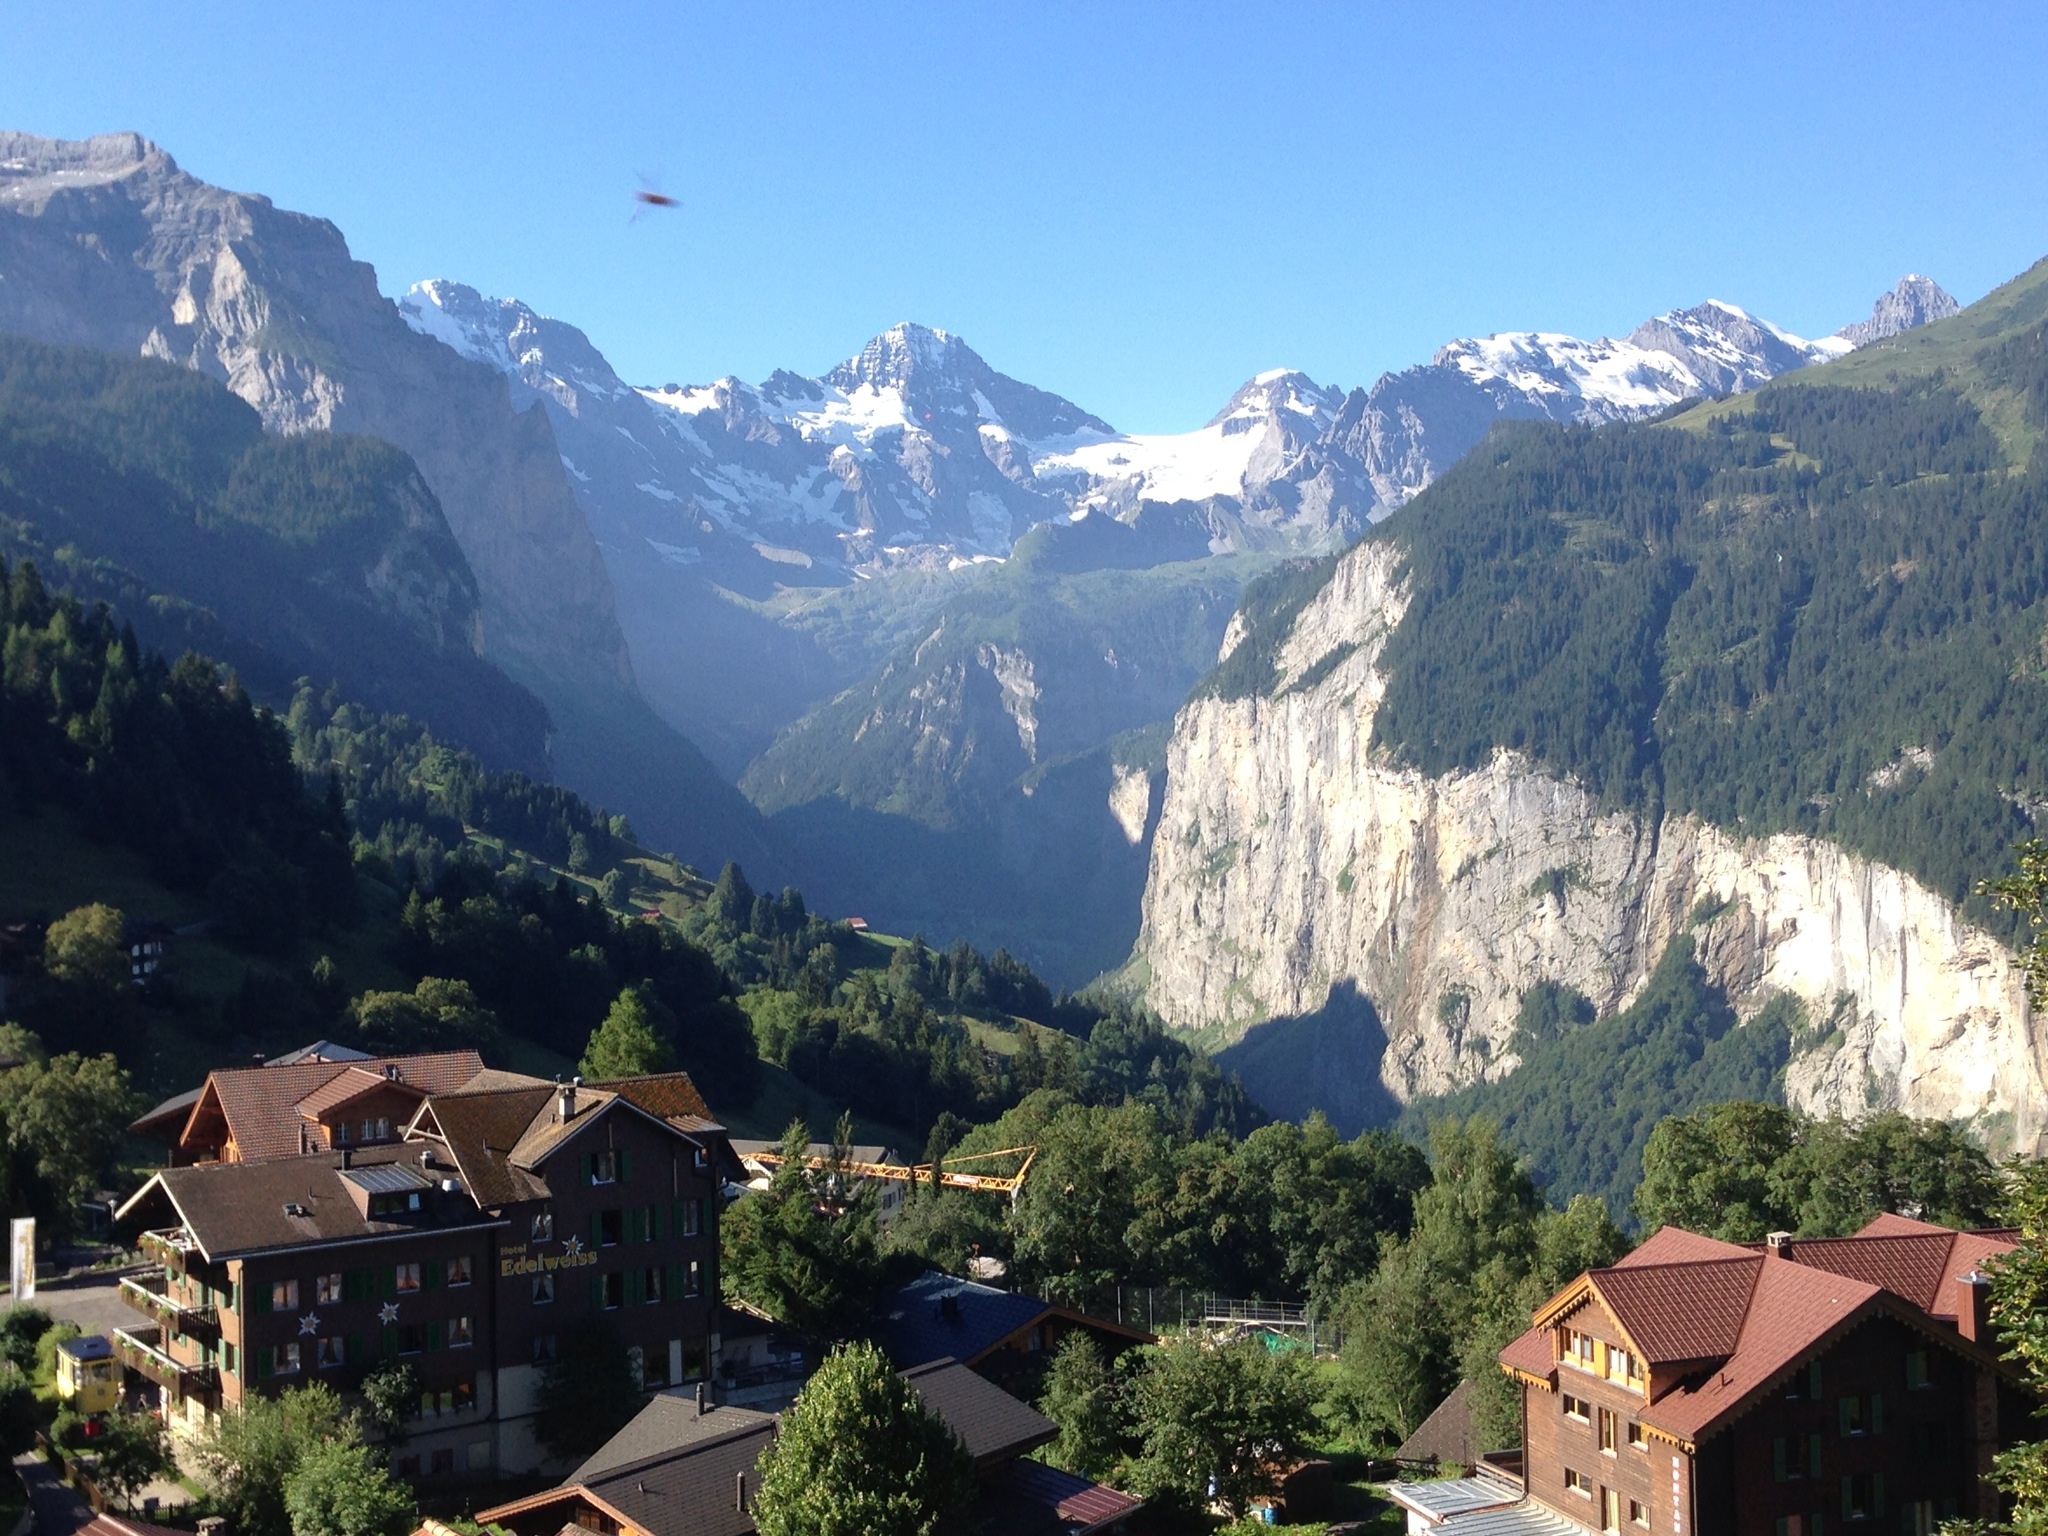 On the train from Wengen down to Lauterbrunnen